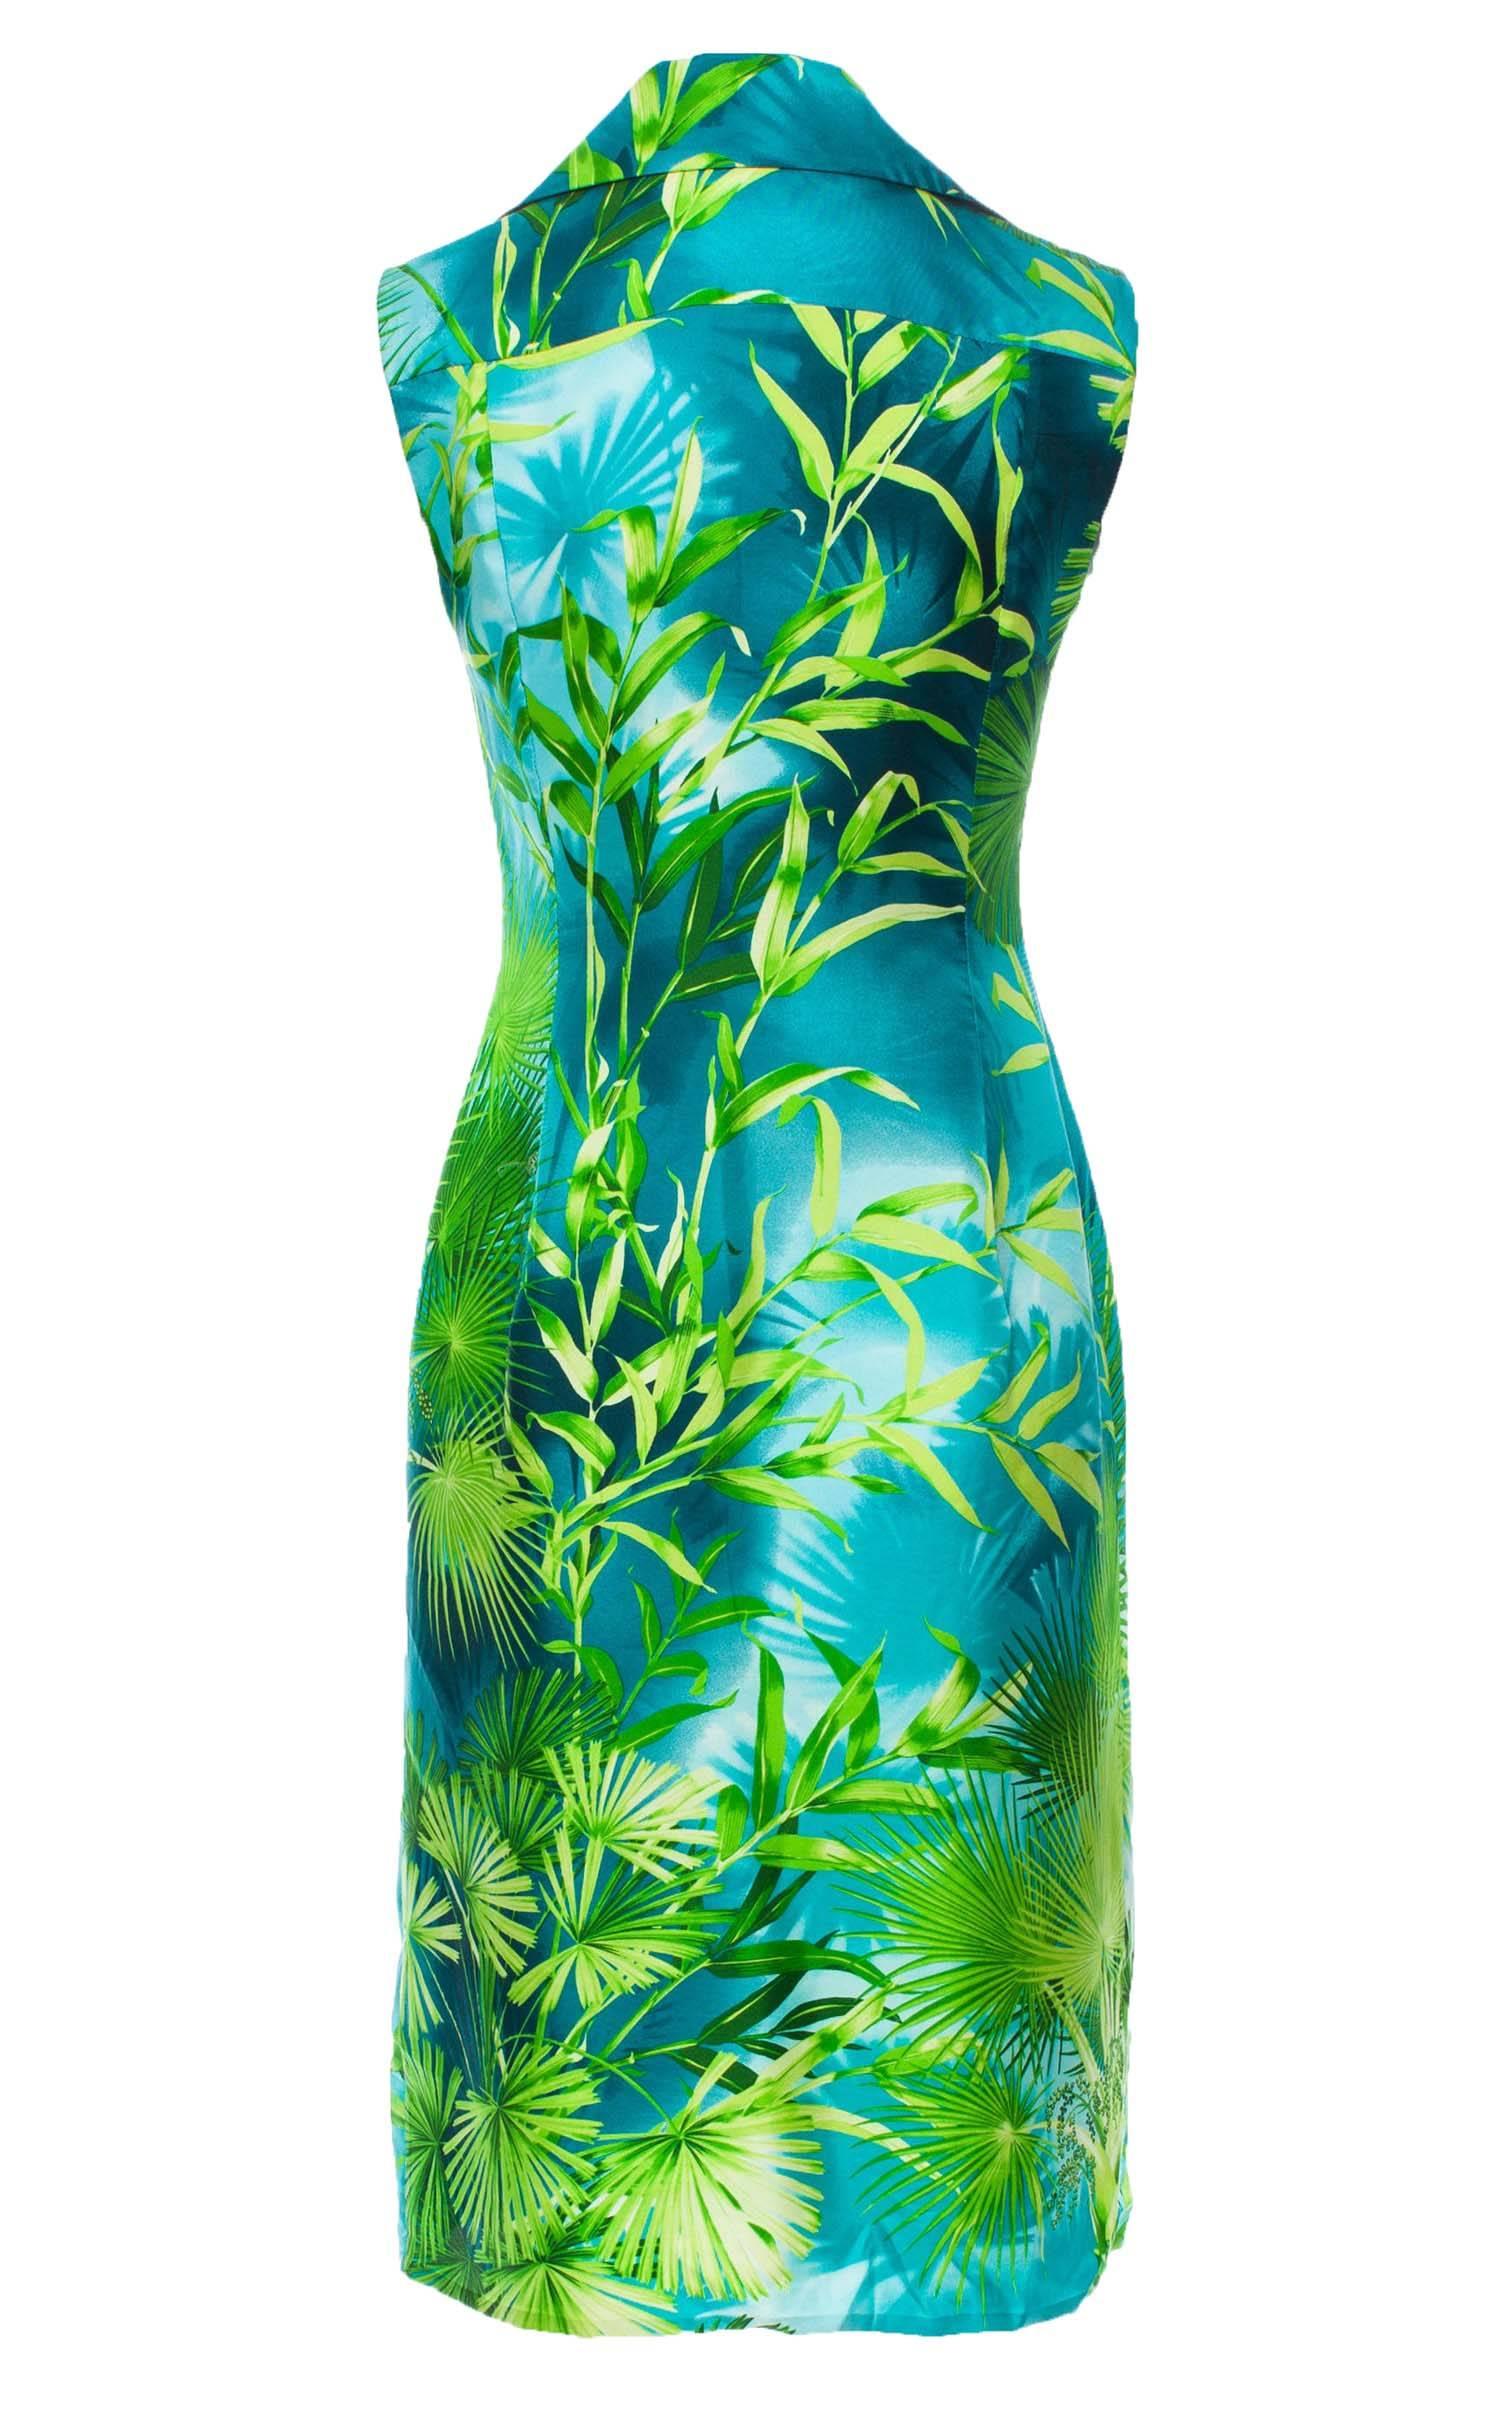 Iconic Gianni Versace Couture Famous Green Print Silk Dress
Italian size - 38
S/S 2000 Collection ( Look 6)
Beads and sequins - embellished placket, Hidden button closure.
Measurements: Length - 39 inches, Bust - 32, Waist - 27.
Made in